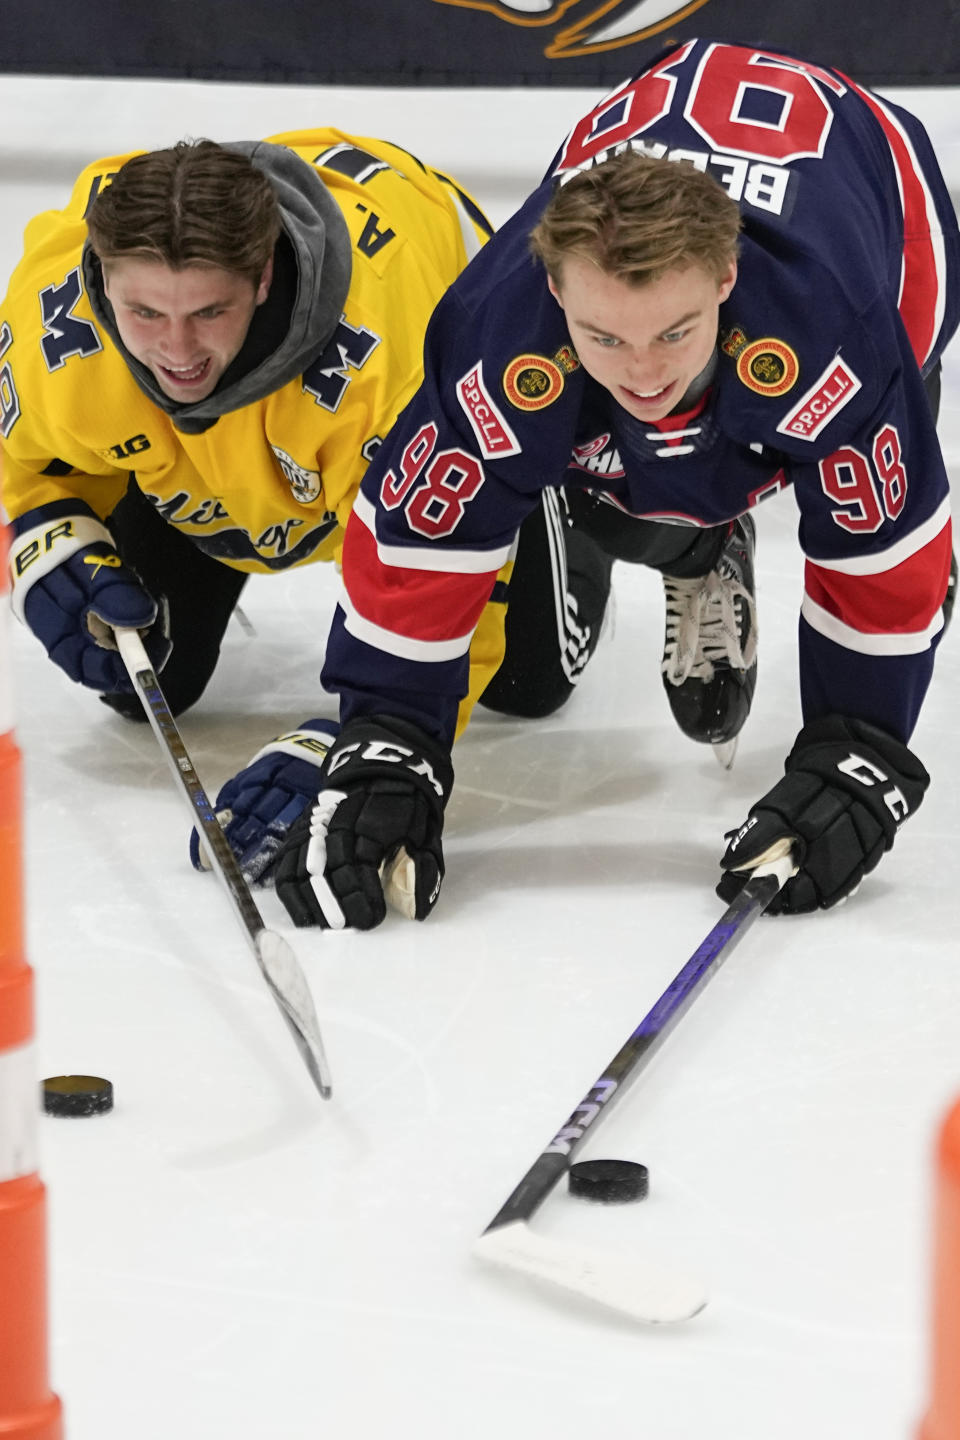 NHL draft prospects Adam Fantilli, left, and Connor Bedard, right, slide across the ice during a youth hockey clinic with other draft prospects and members of the NHL Player Inclusion Coalition, Tuesday, June 27, 2023, in Nashville, Tenn. (AP Photo/George Walker IV)